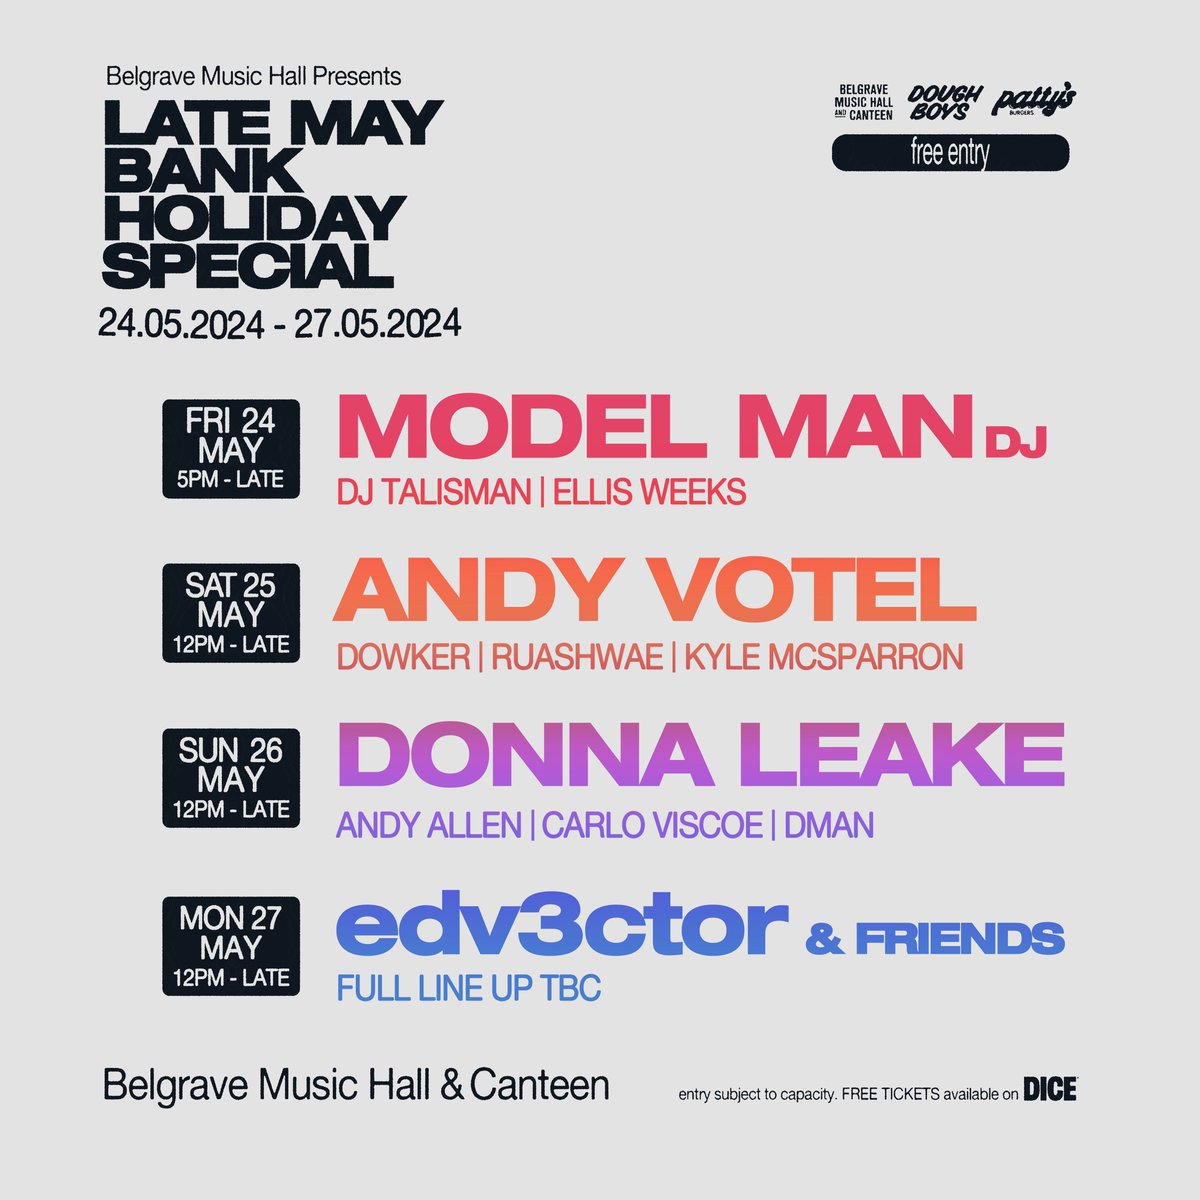 Even more bank holiday fun awaits, with a fresh lineup of DJs soundtracking your late May bank hols in the Canteen 🫡 This time around we're joined by Model Man, @andyvotel, Donna Leake and Edv3ctor across the long weekend! Keep an eye out for more announcements coming soon...👀